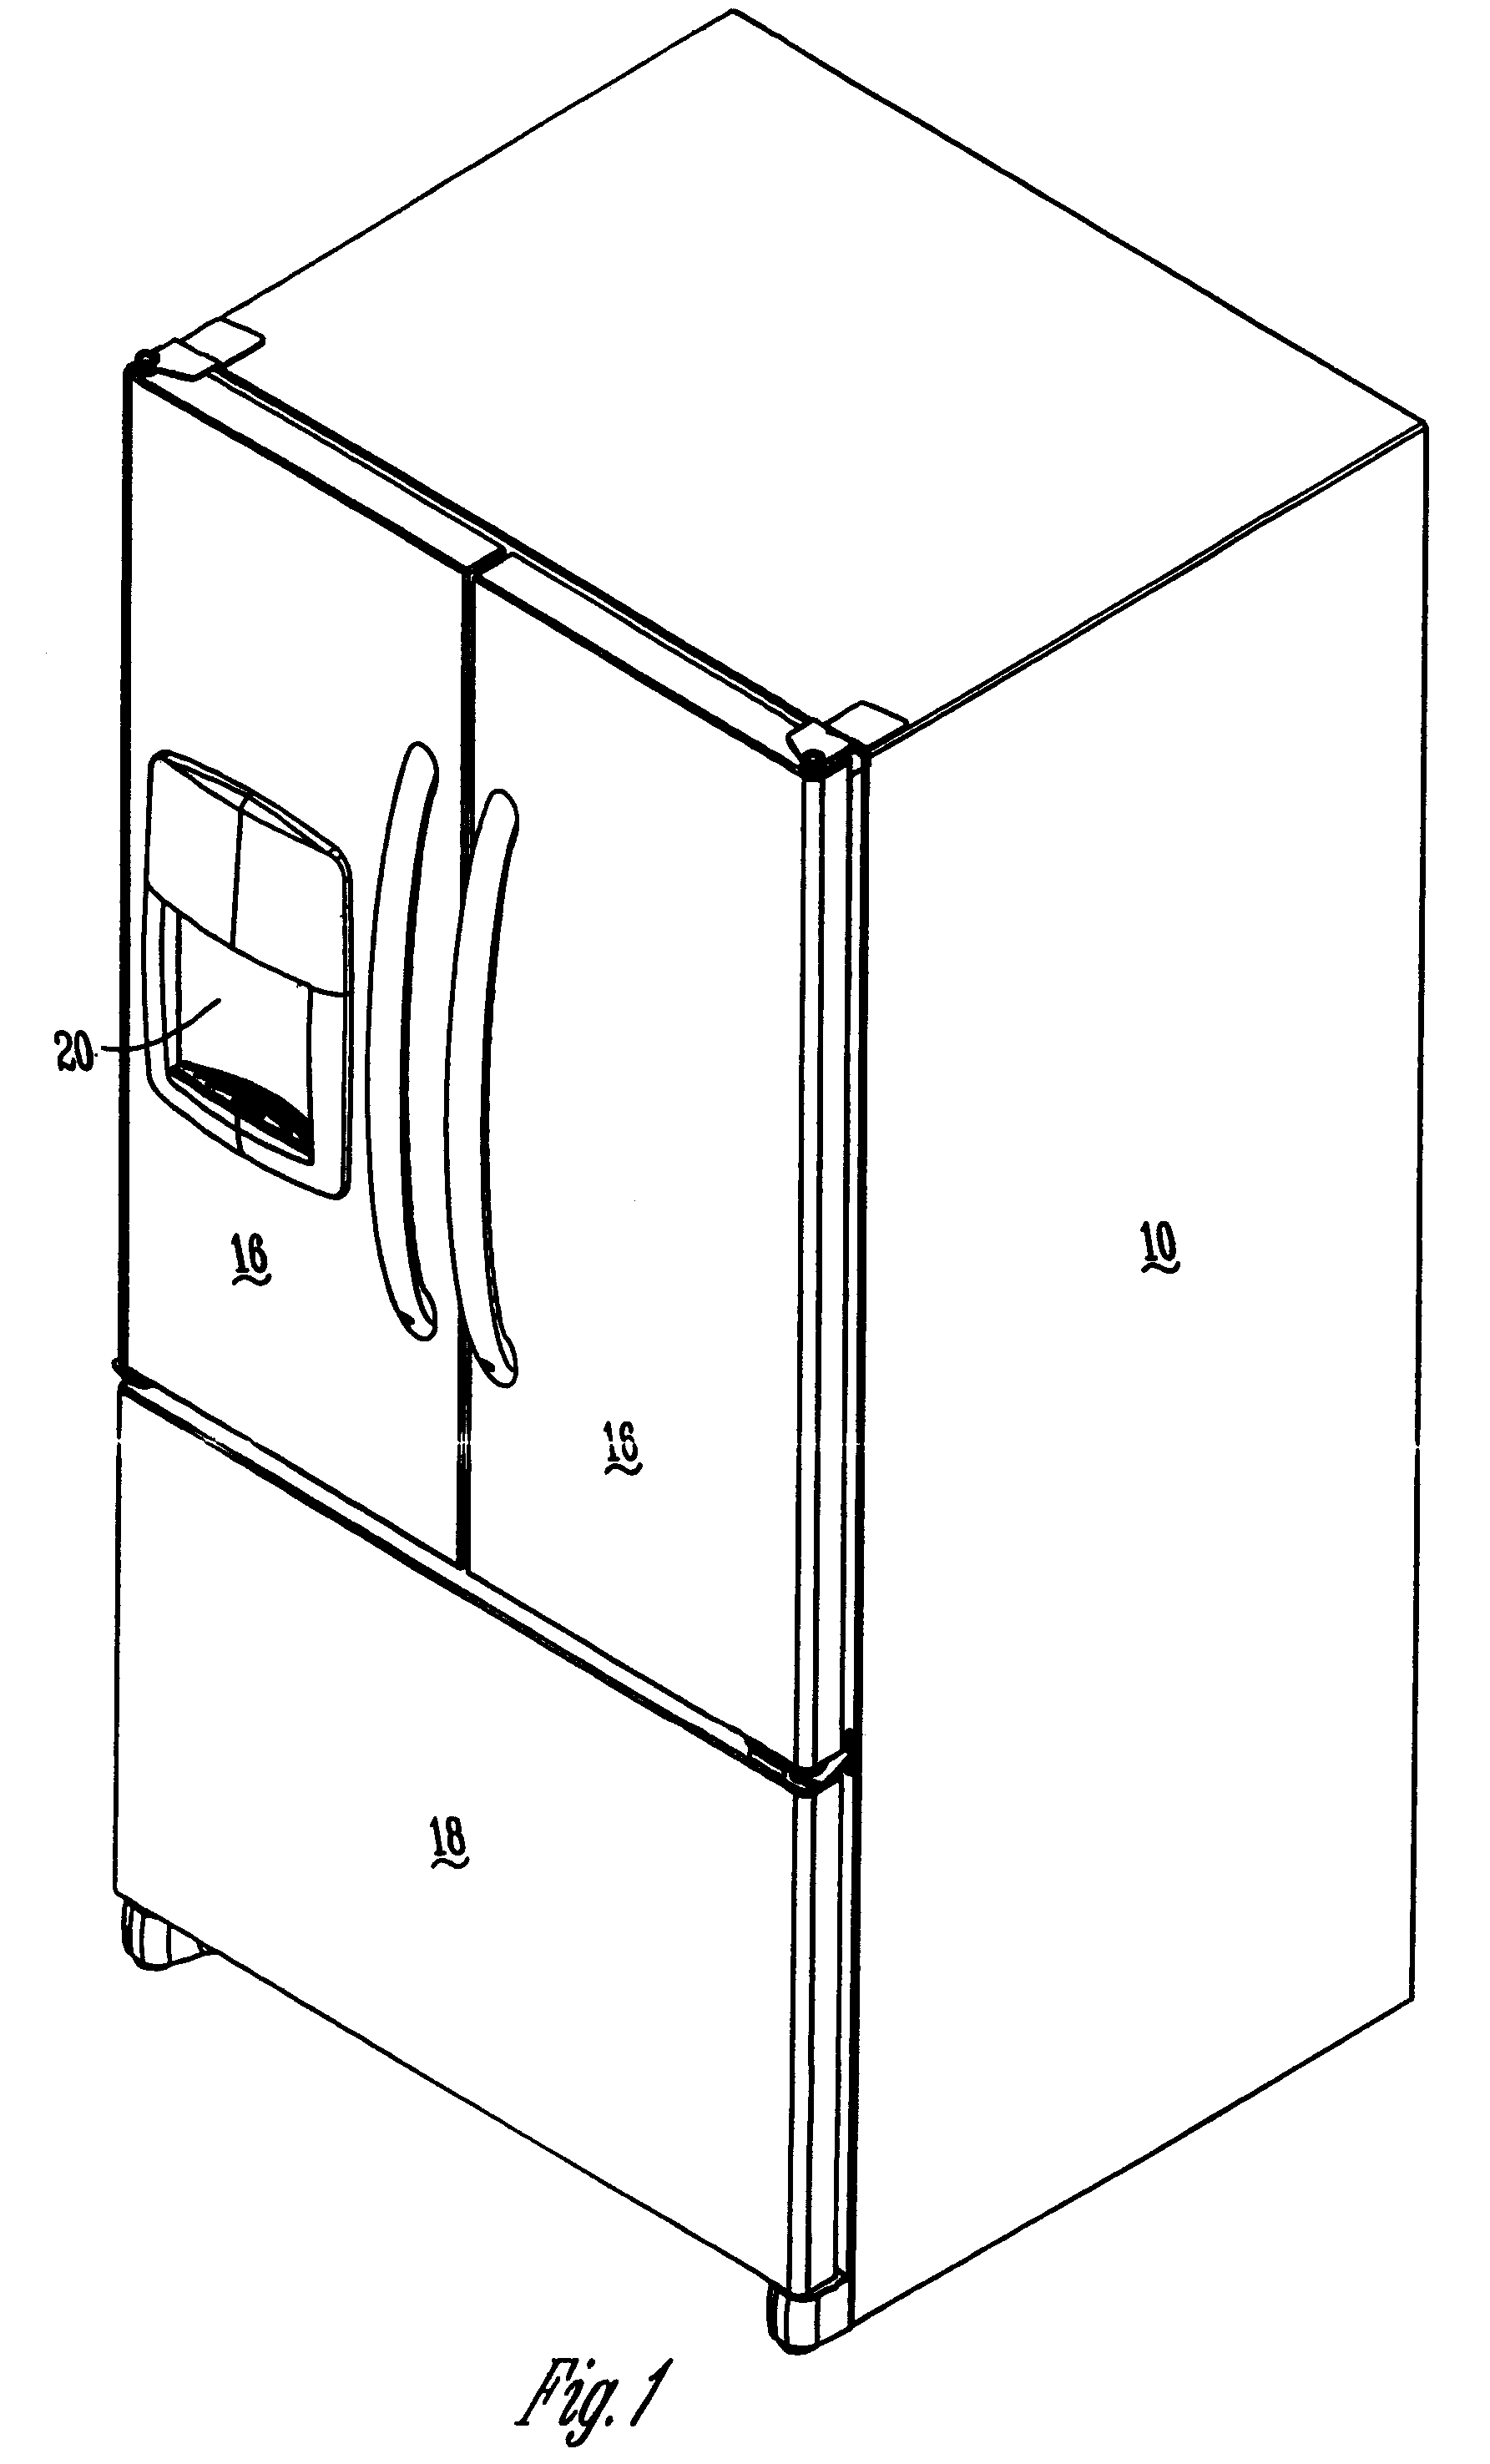 Insulated ice compartment for bottom mount refrigerator with controlled heater